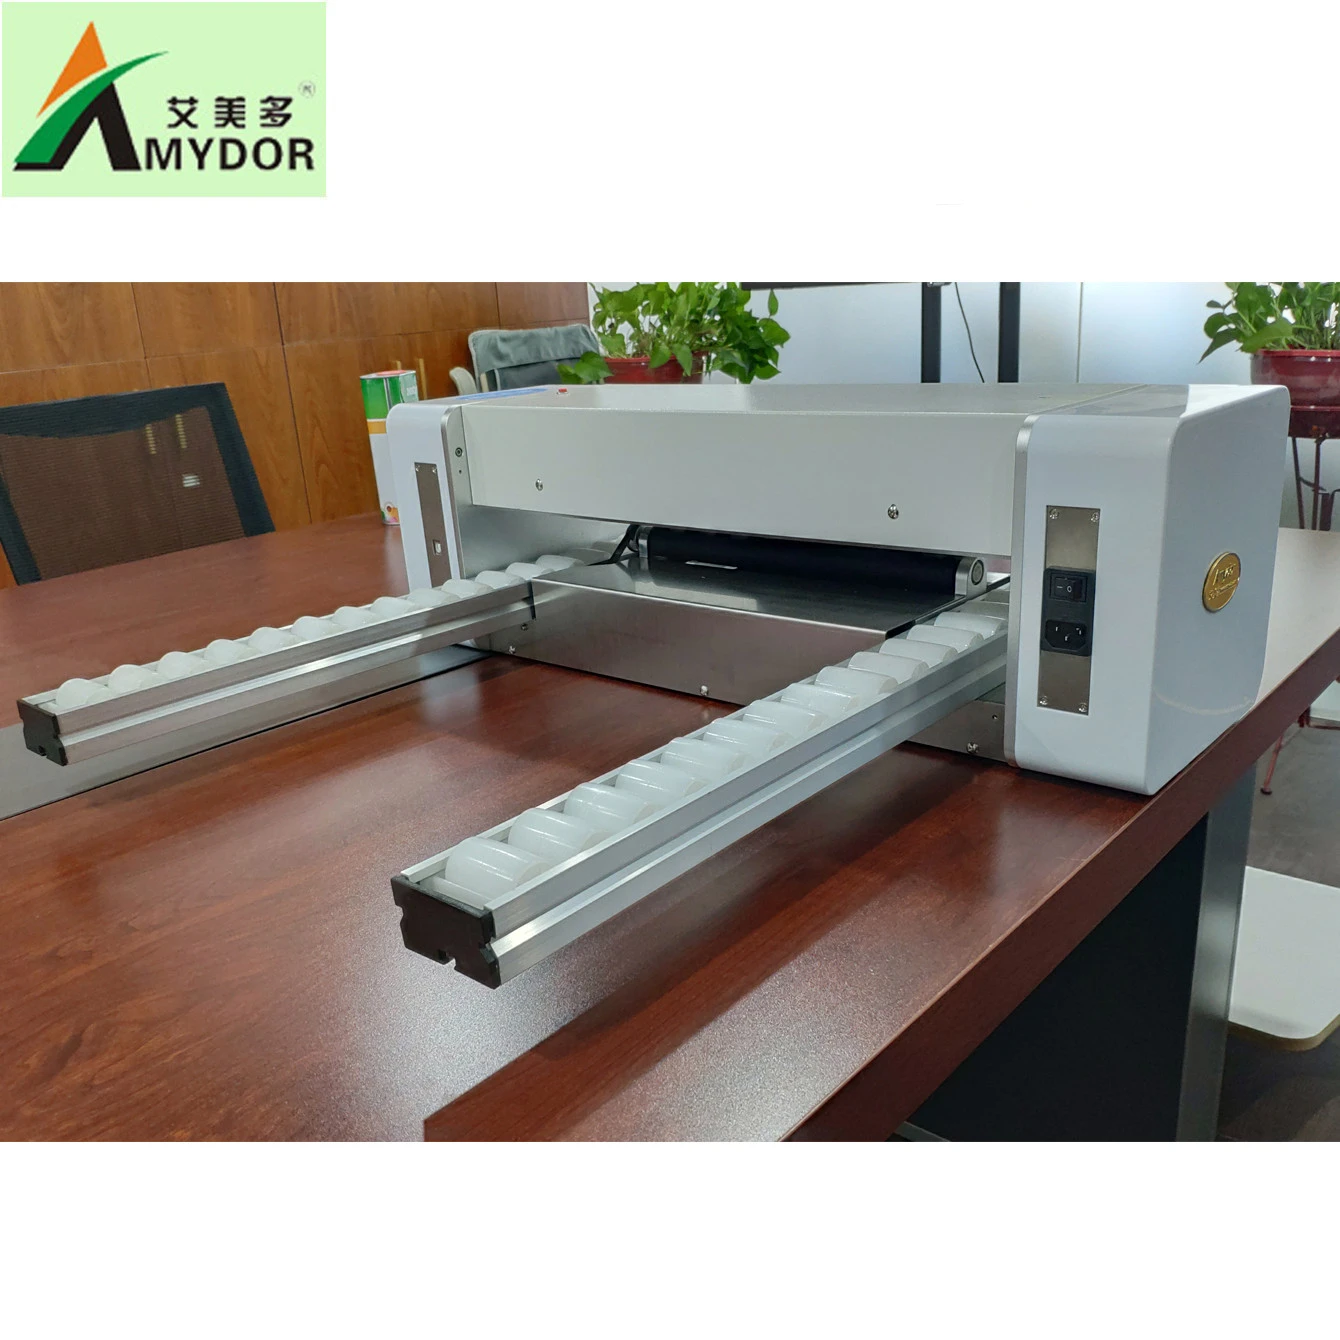 No film and exposure needed, screen printing frame printer, screen printing printer, screen printing wooden frame printer AMD550